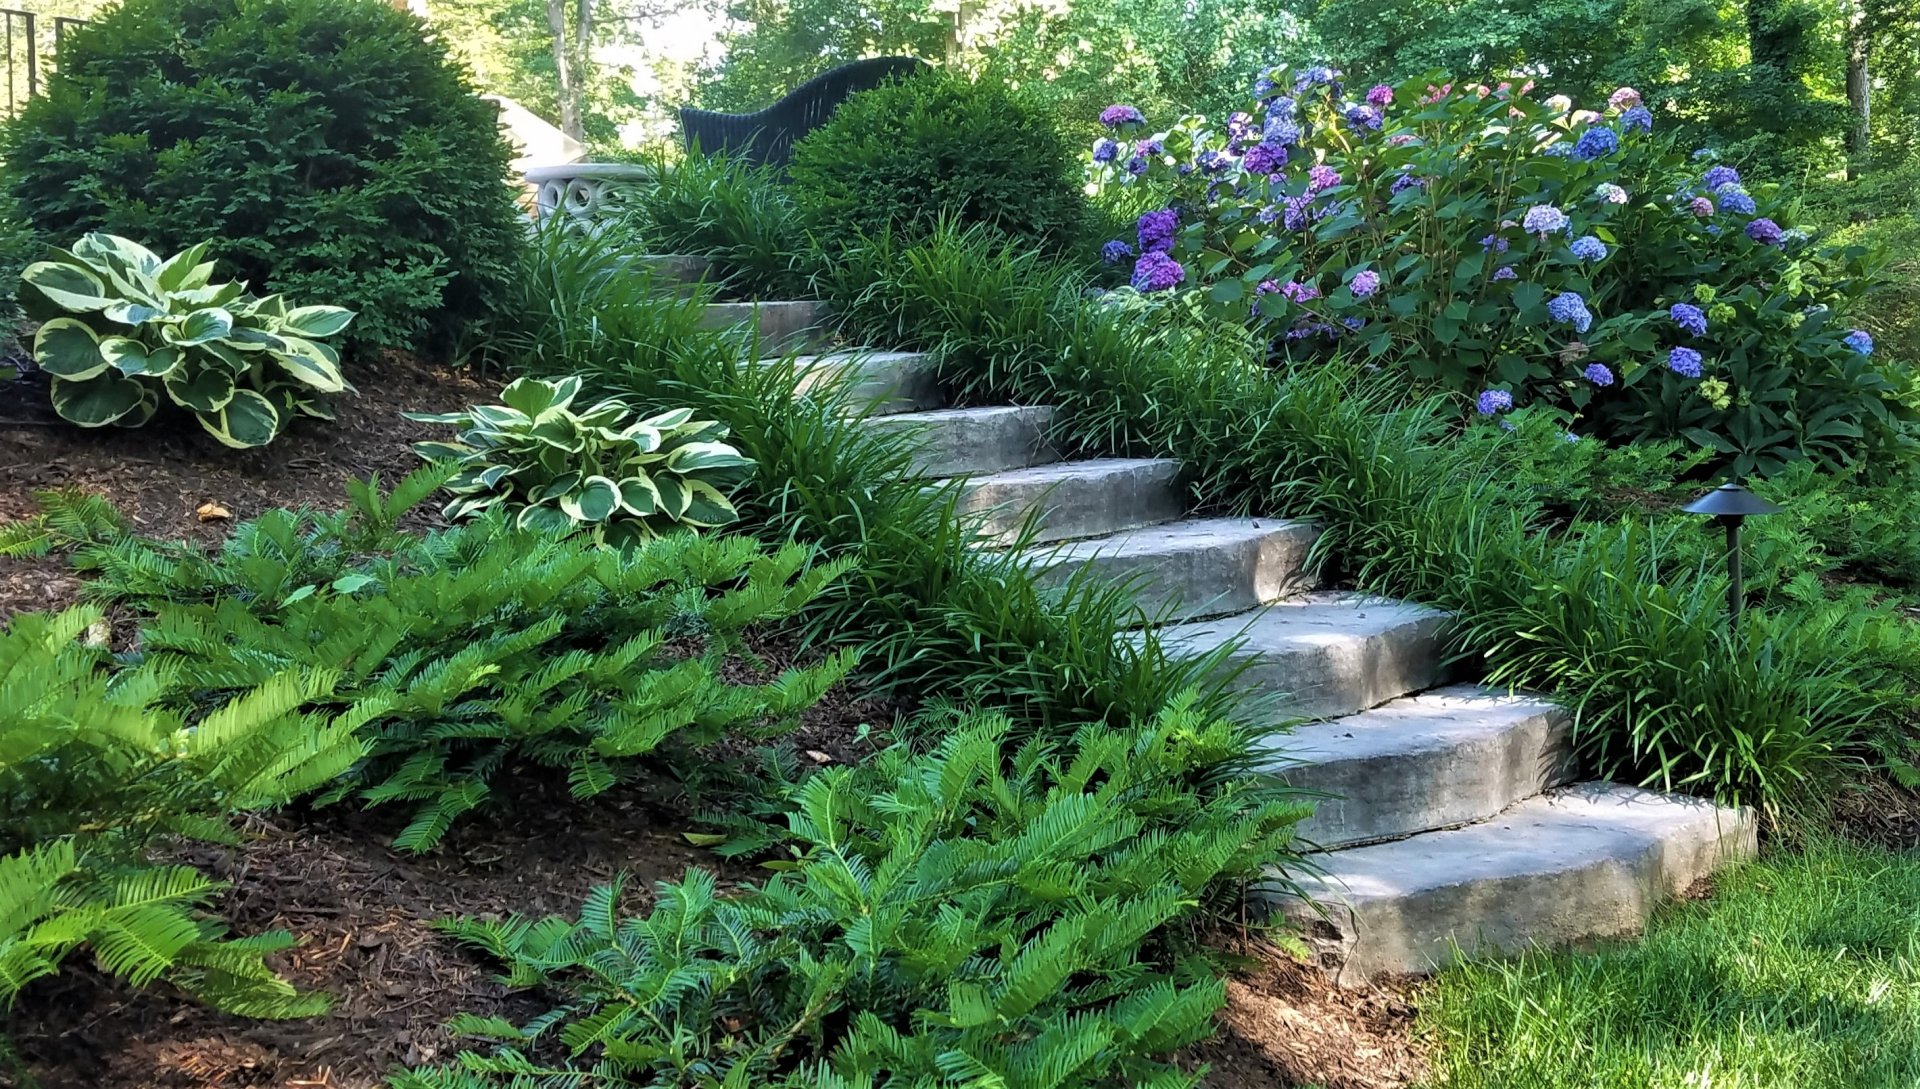 Newline cast steps are the solution and plantings to stabilize the slope. : Pavers & Stone : Richmond VA Landscape Designer: Gardens by Monit, LLC: Monit Rosendale landscape designer Richmond and Charlottesville Virginia and Fredericksburg Virginia and Williamsburg Virginia